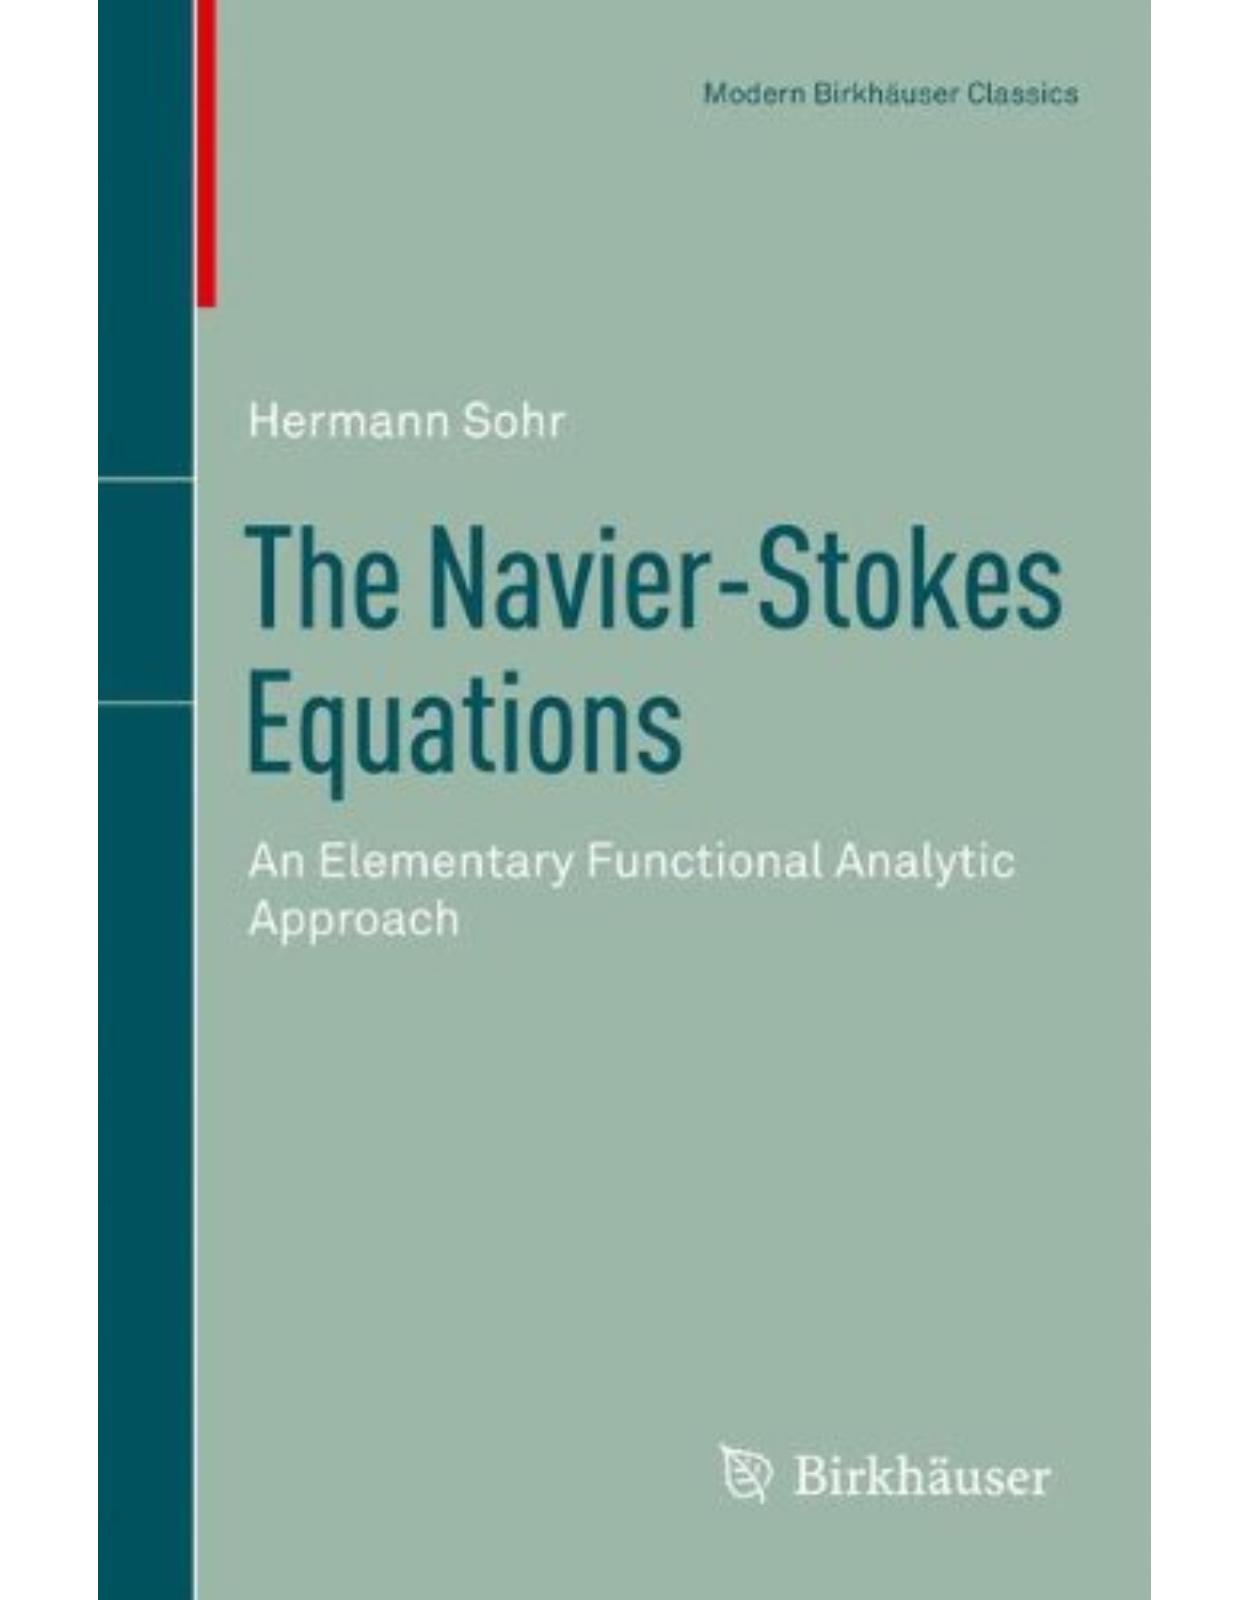  The Navier-Stokes Equations